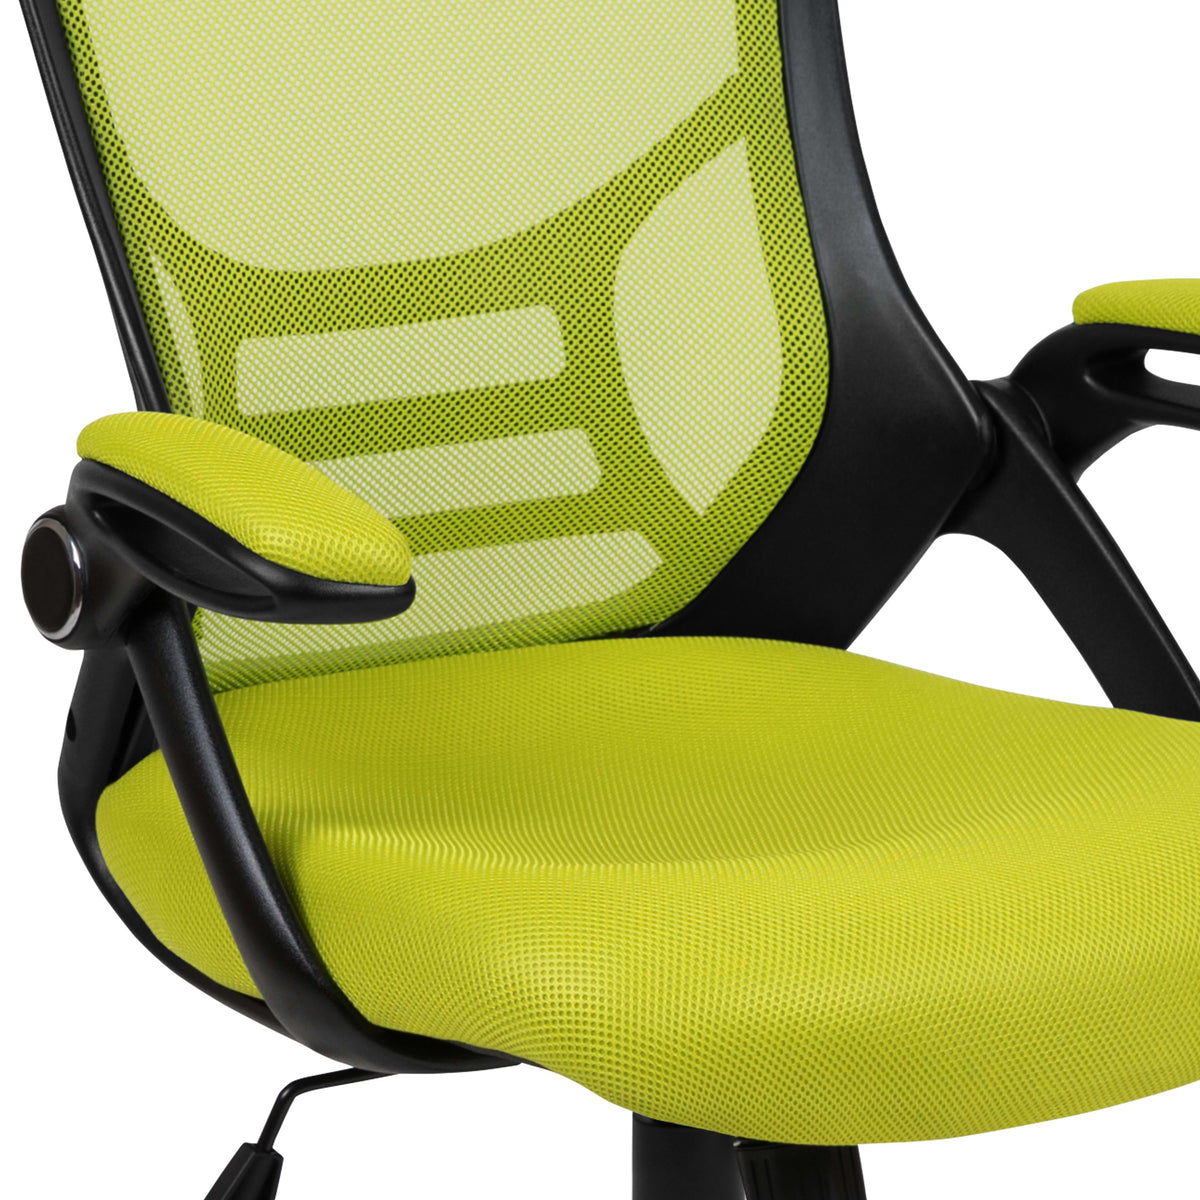 Green |#| High Back Green Mesh Ergonomic Office Chair with Black Frame and Flip-up Arms